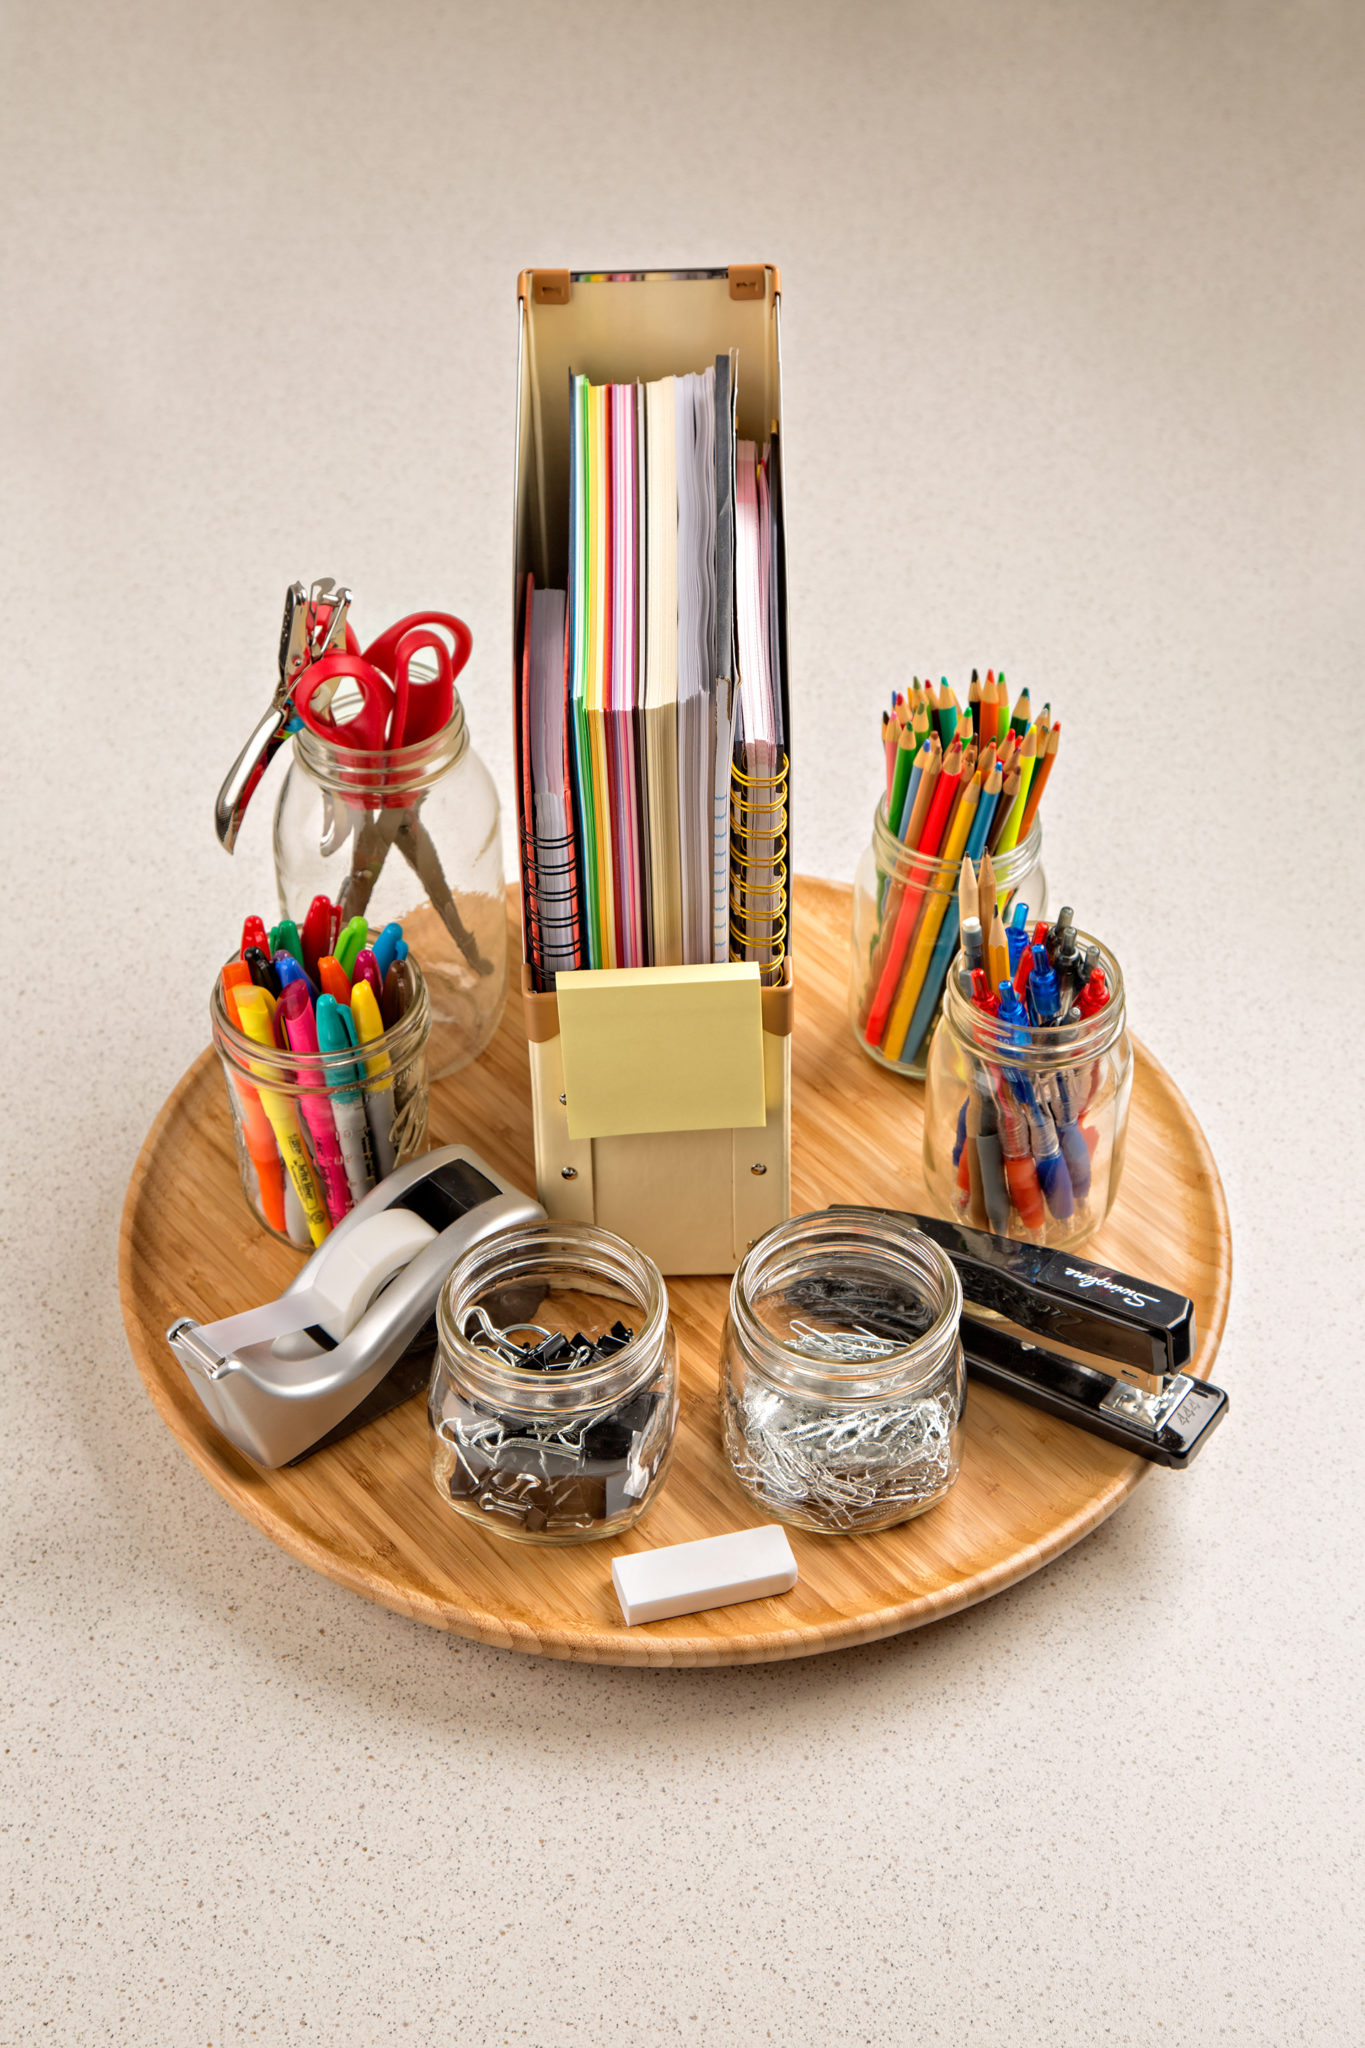 Spinning table tray utilizing a lazy susan to organize school and desk supplies